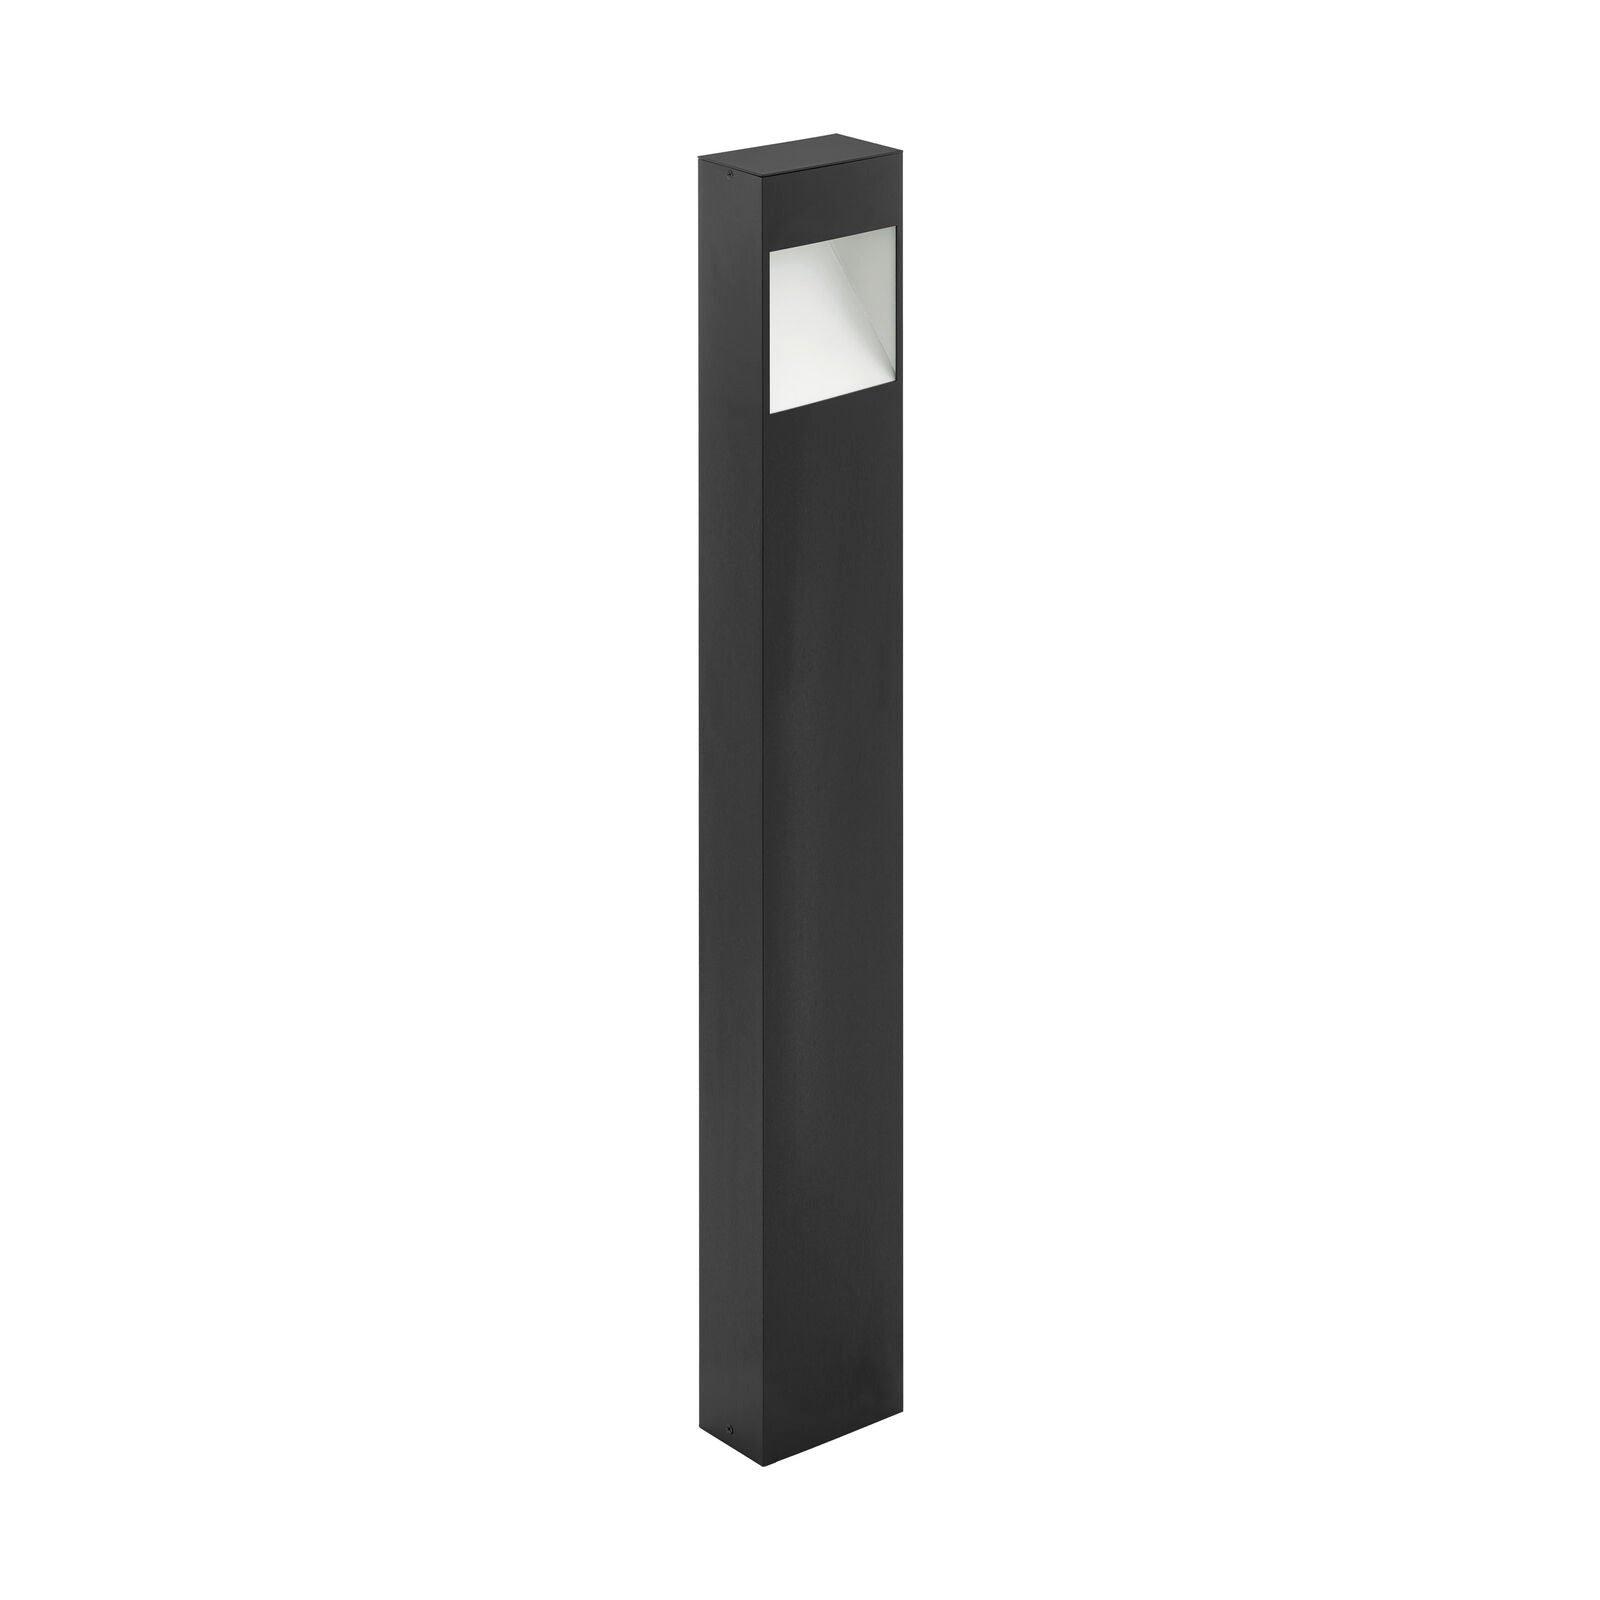 IP44 Outdoor Pedestal Light Anthracite Tall Square Post 10W Built in LED